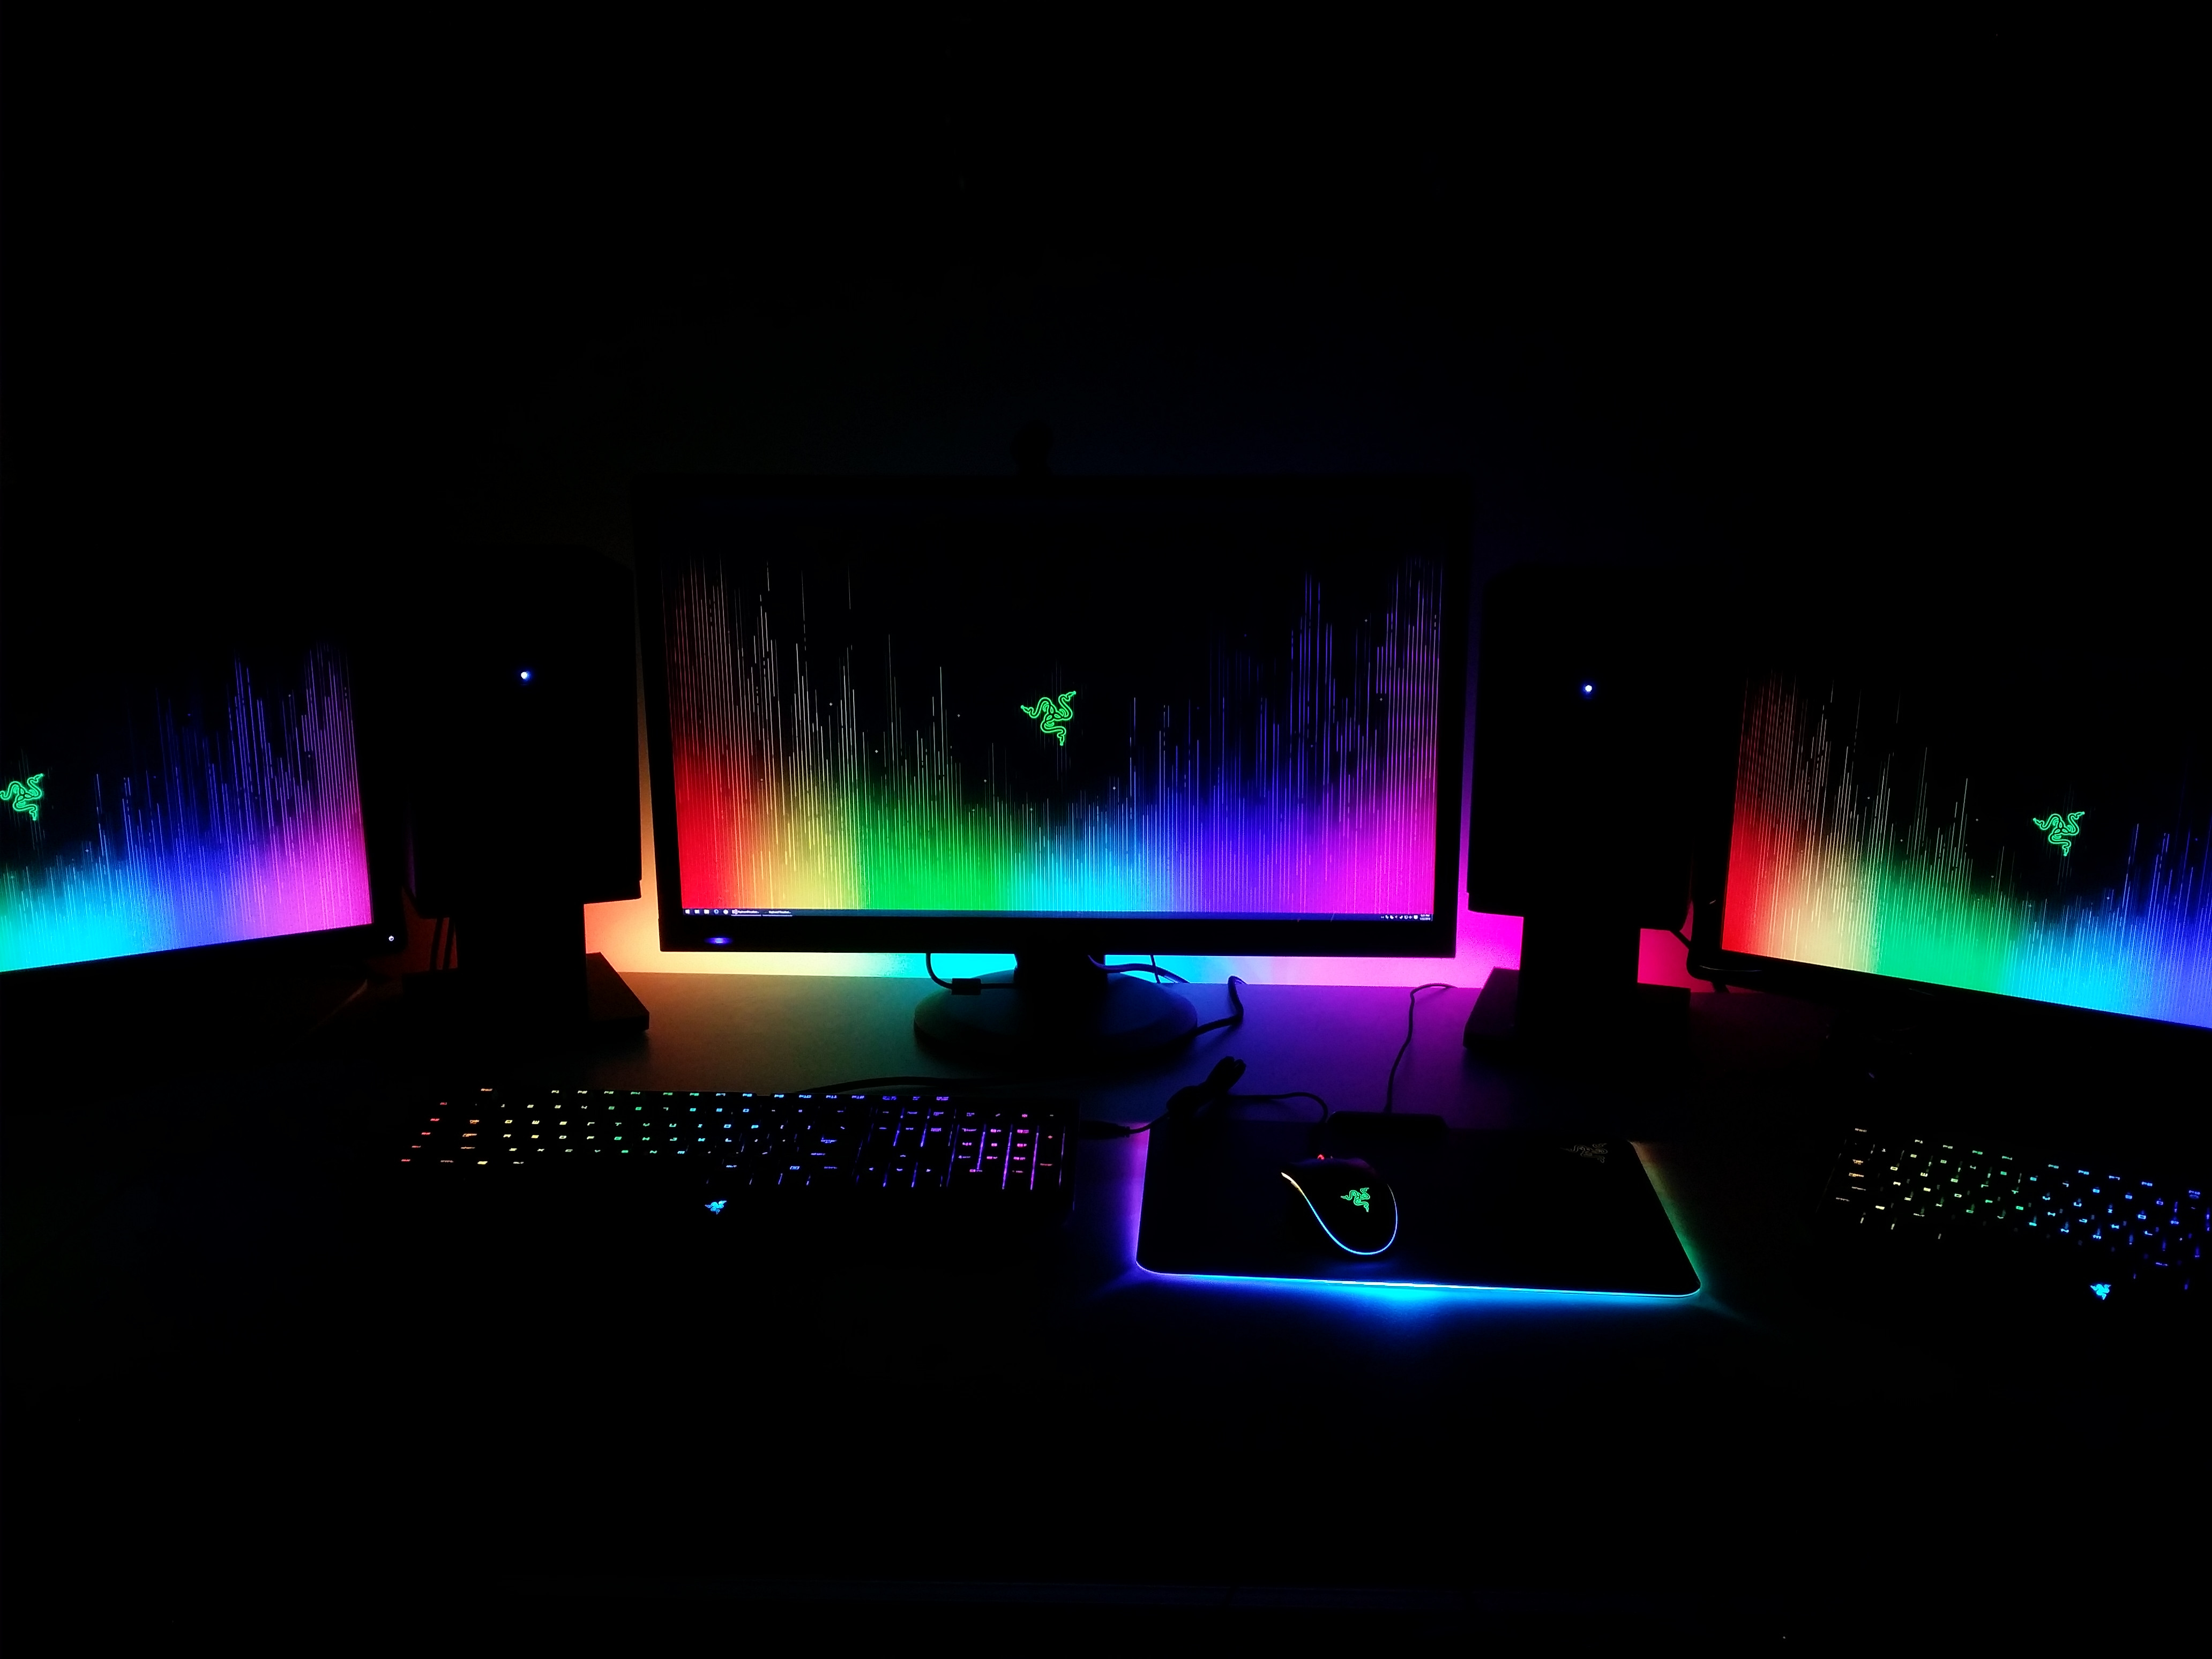 Heres my Chroma setup to go along with the new wallpaper razer